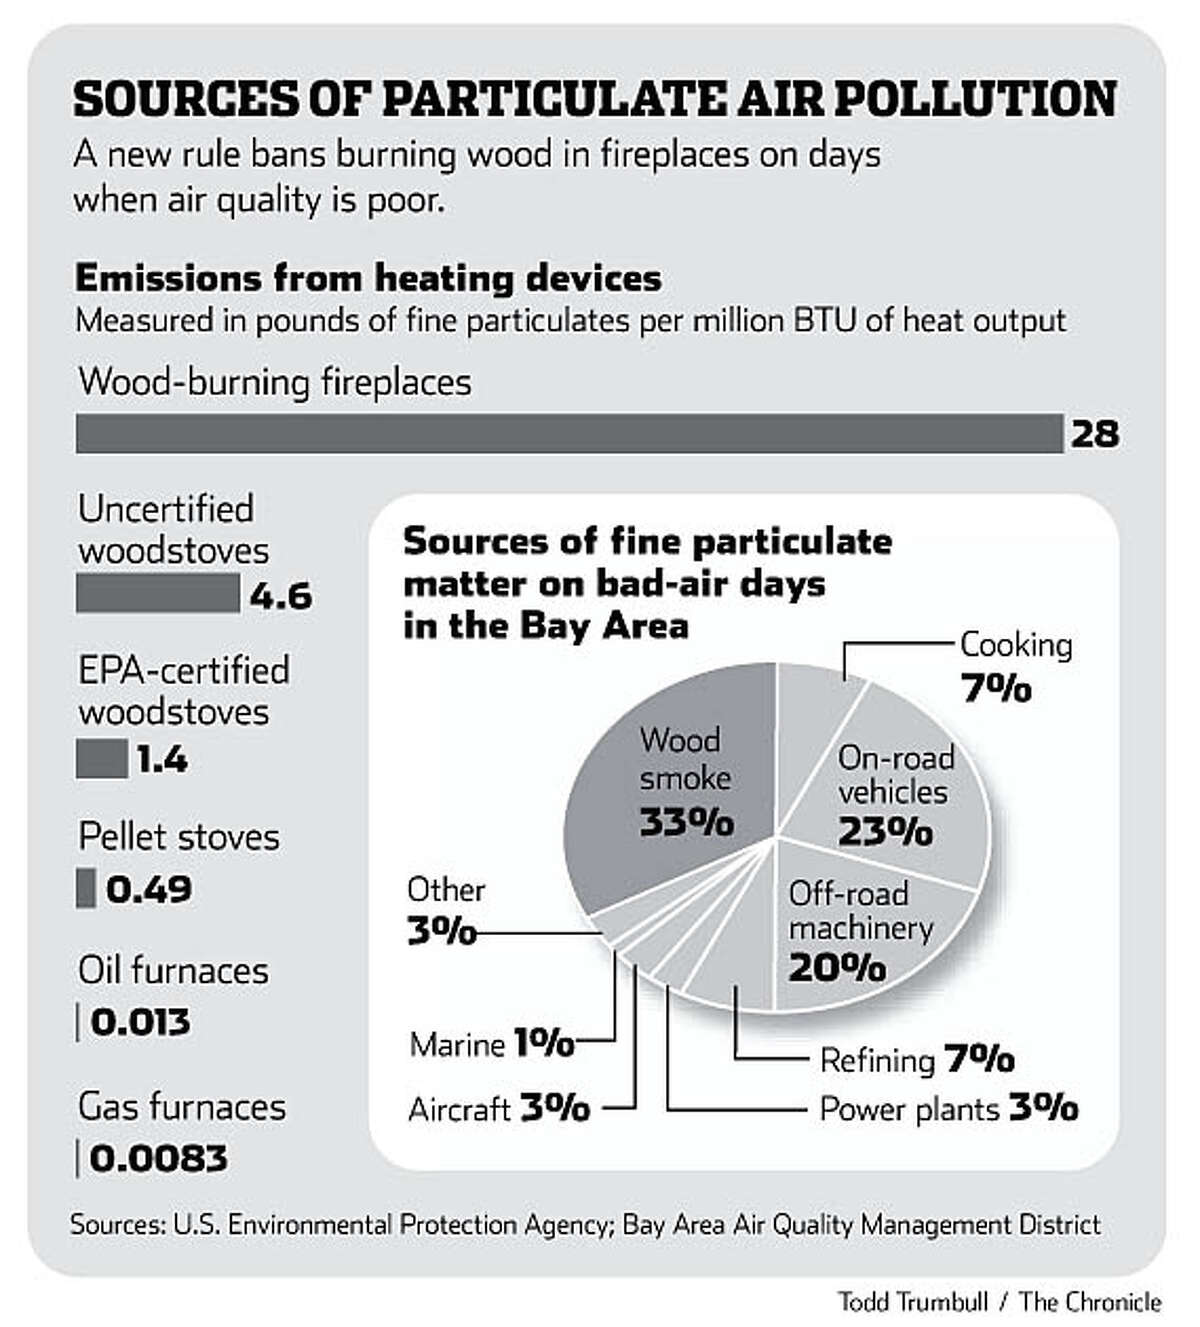 Sources of Particulate Air Pollution (Todd Trumbull / The Chronicle)